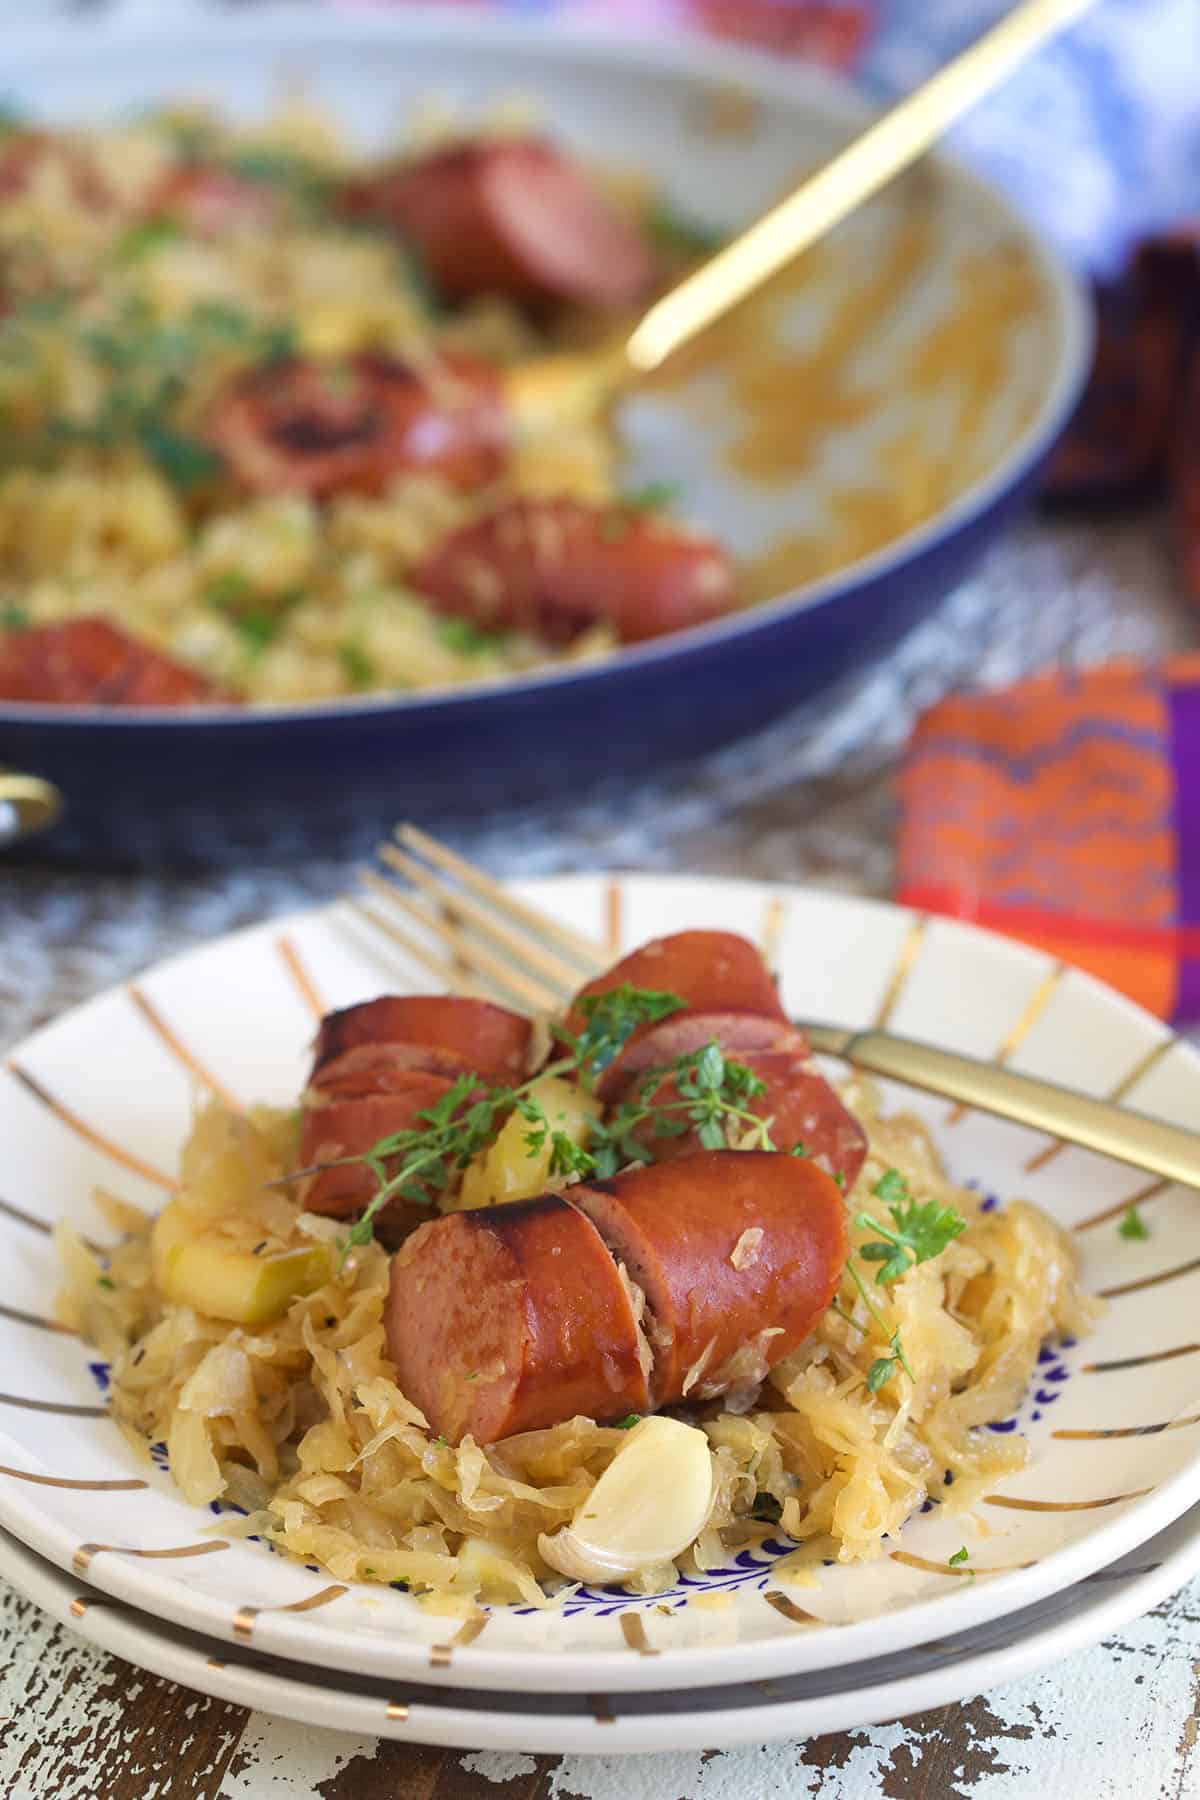 Sausage is piled on top of a serving of sauerkraut and apples on a white striped plate.